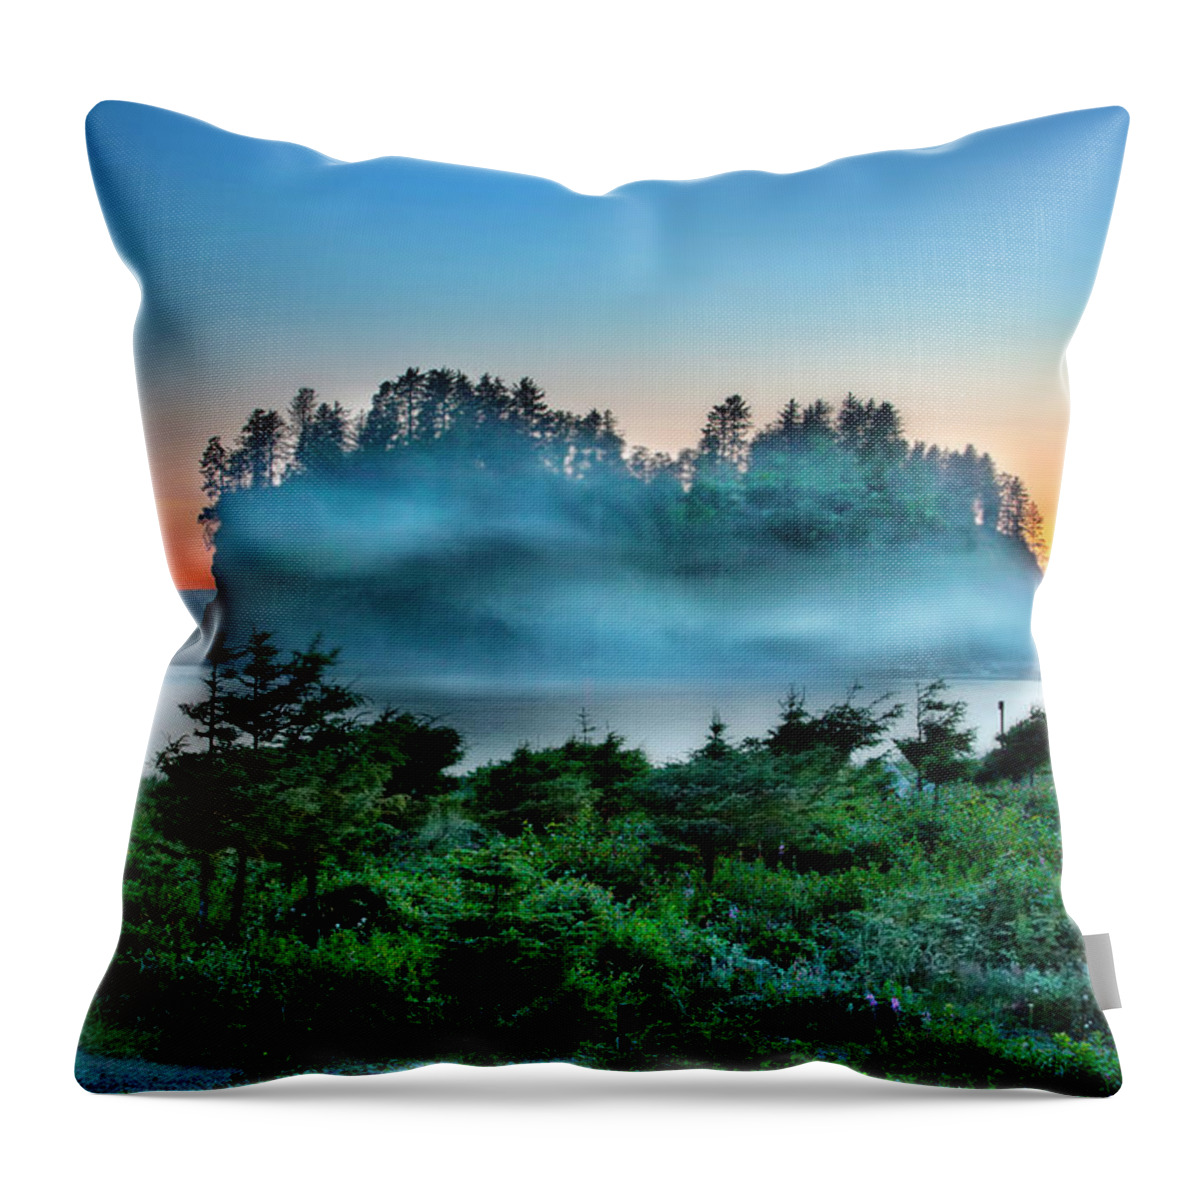 Washington Coastline Throw Pillow featuring the photograph First Beach by David Chasey